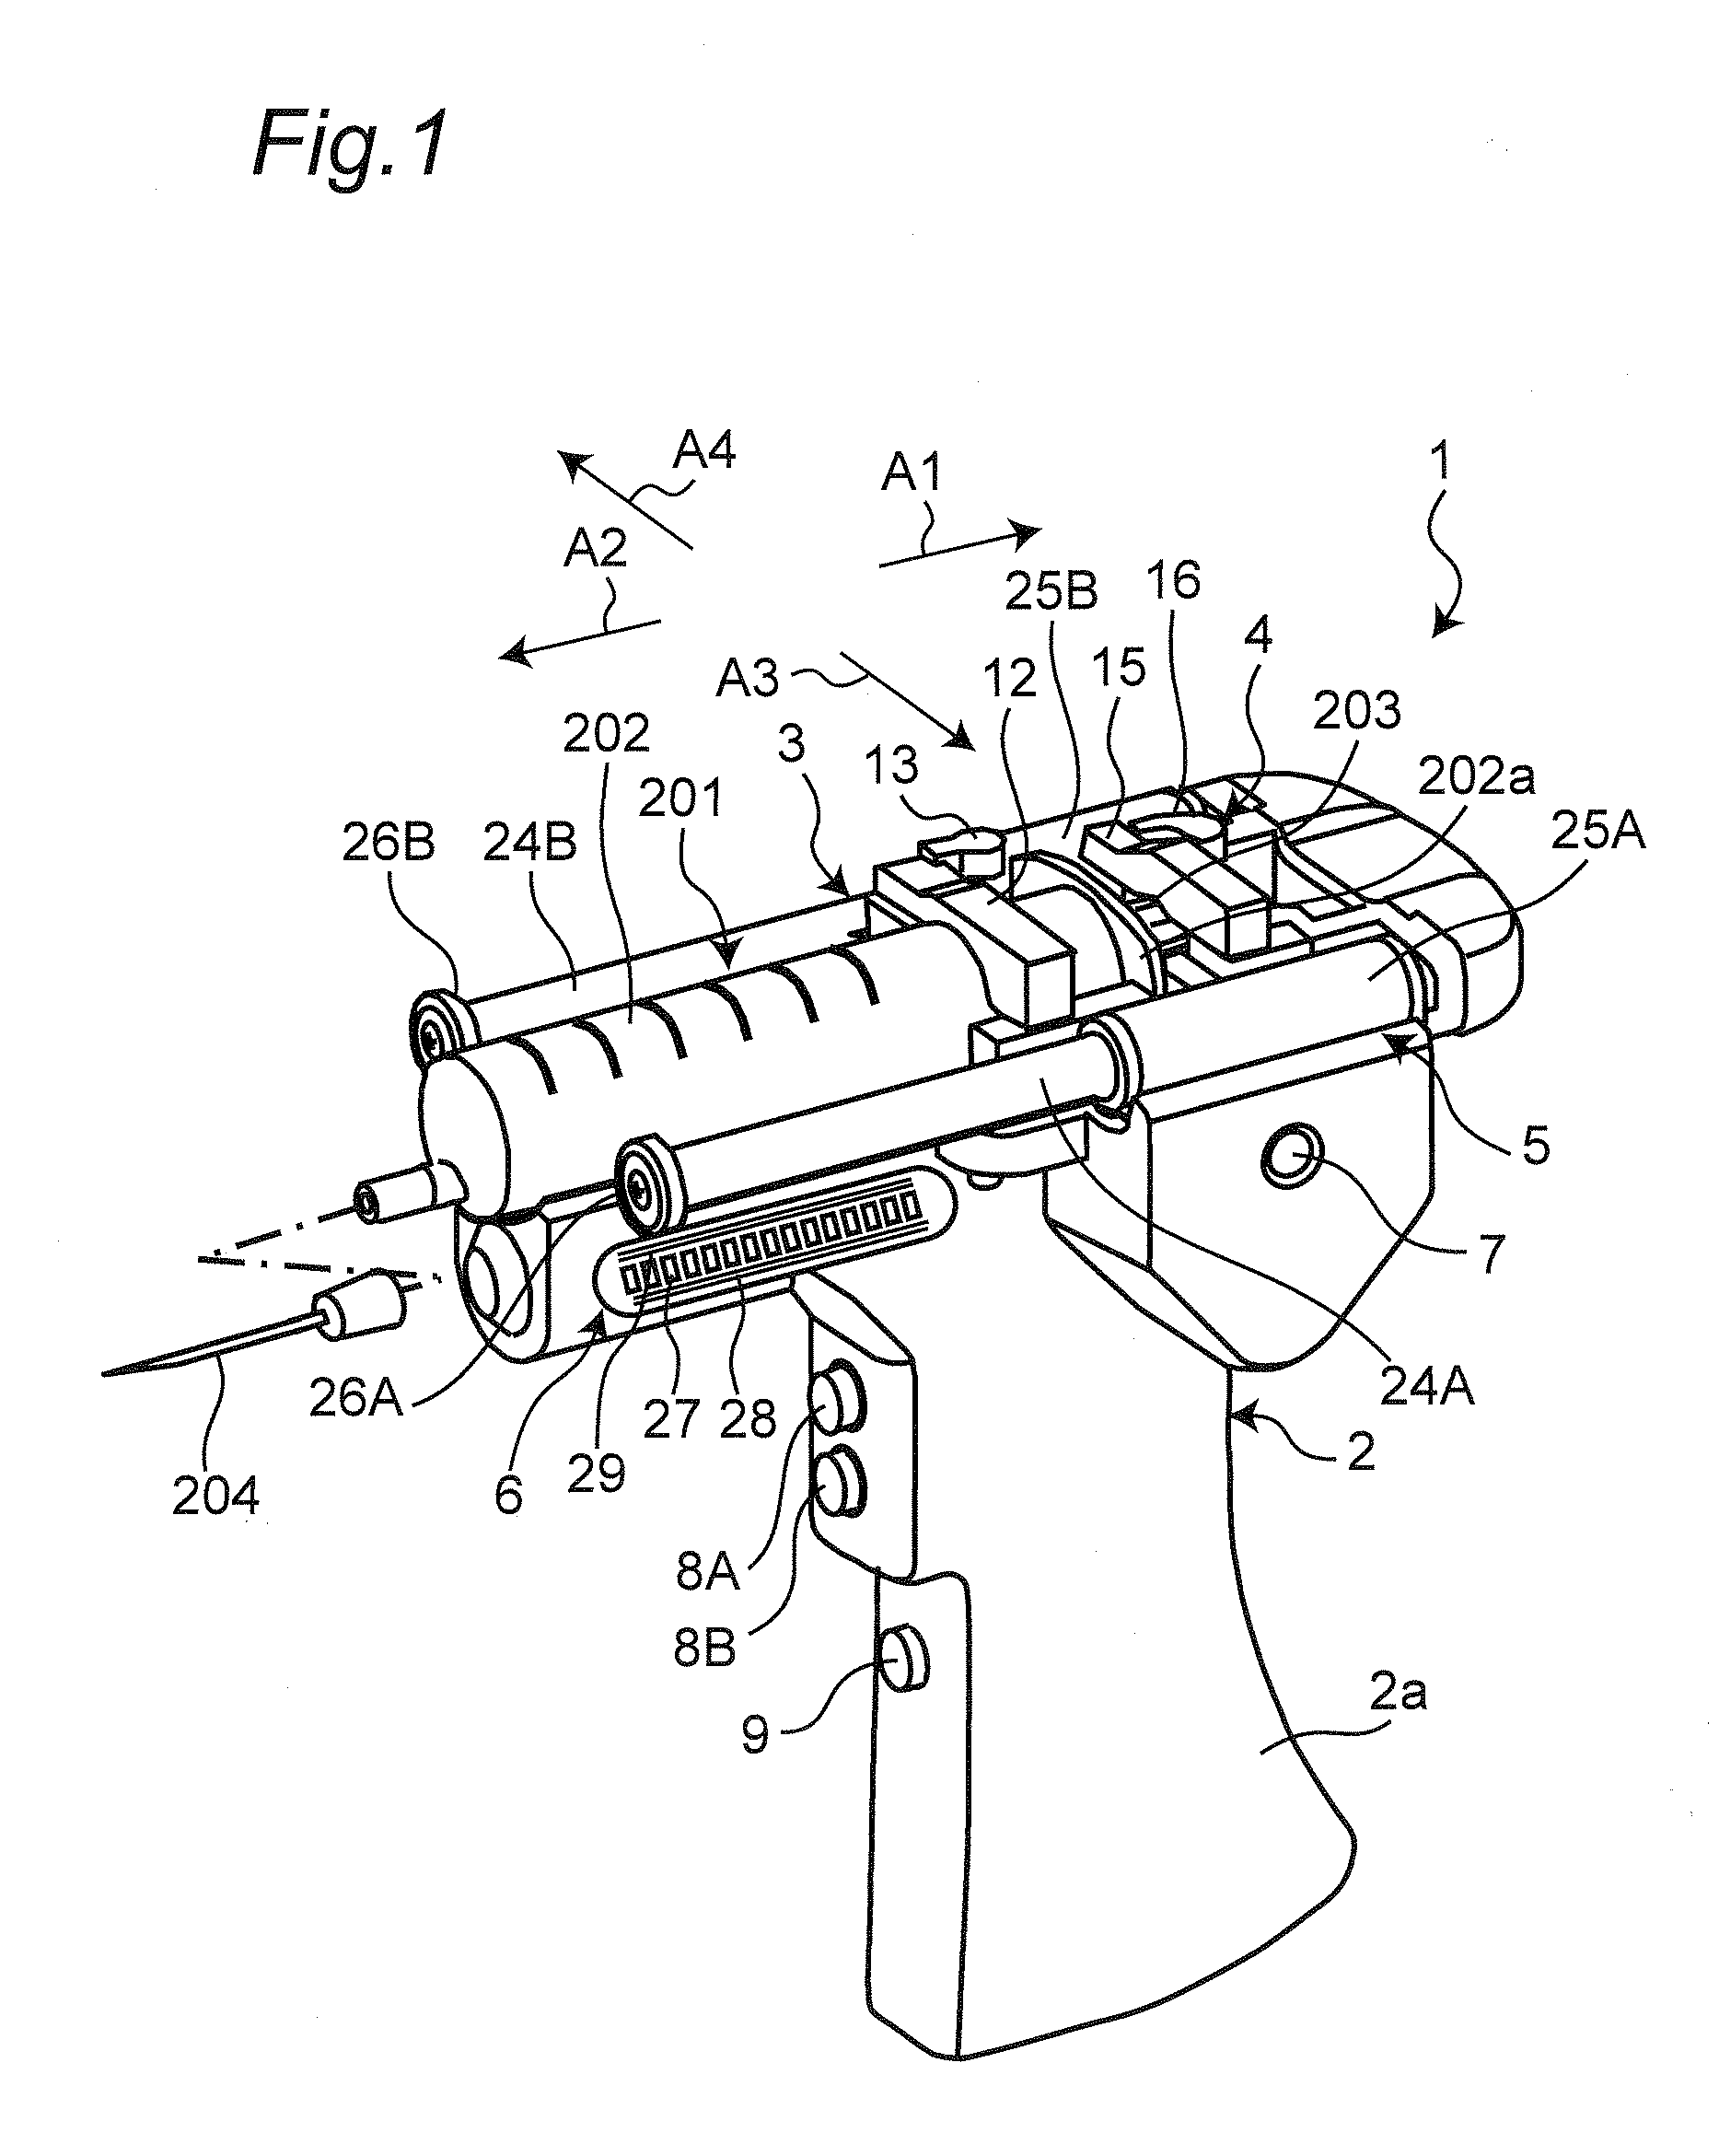 Syringe drive device and medication dispensing device